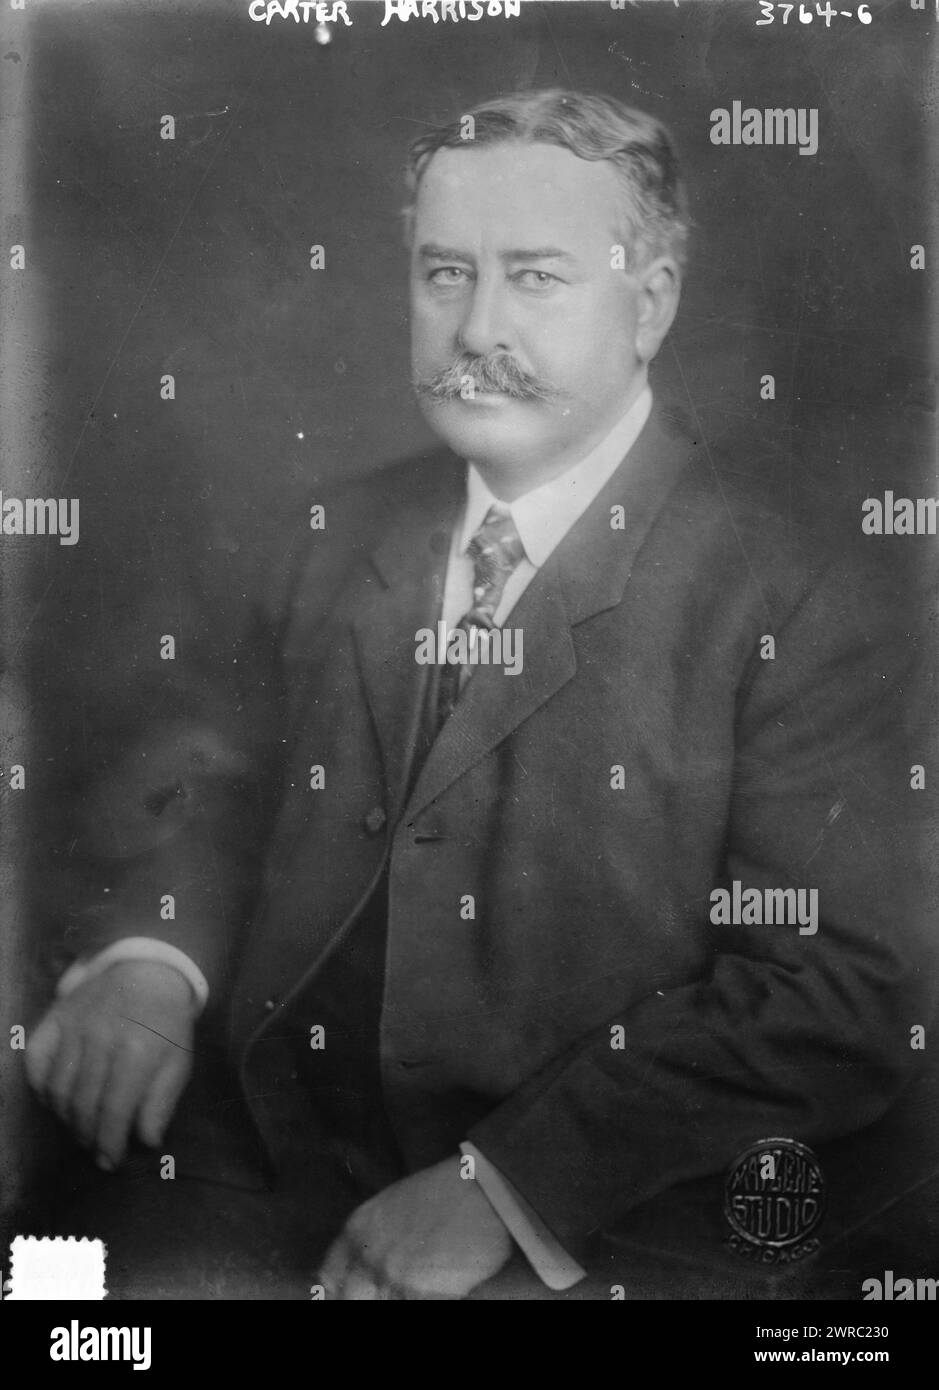 Carter Harrison, Photograph shows Carter Henry Harrison, Jr. (1860-1953) who was Mayor of Chicago (1897-1905 and 1911-1915)., between ca. 1915 and ca. 1920, Glass negatives, 1 negative: glass Stock Photo